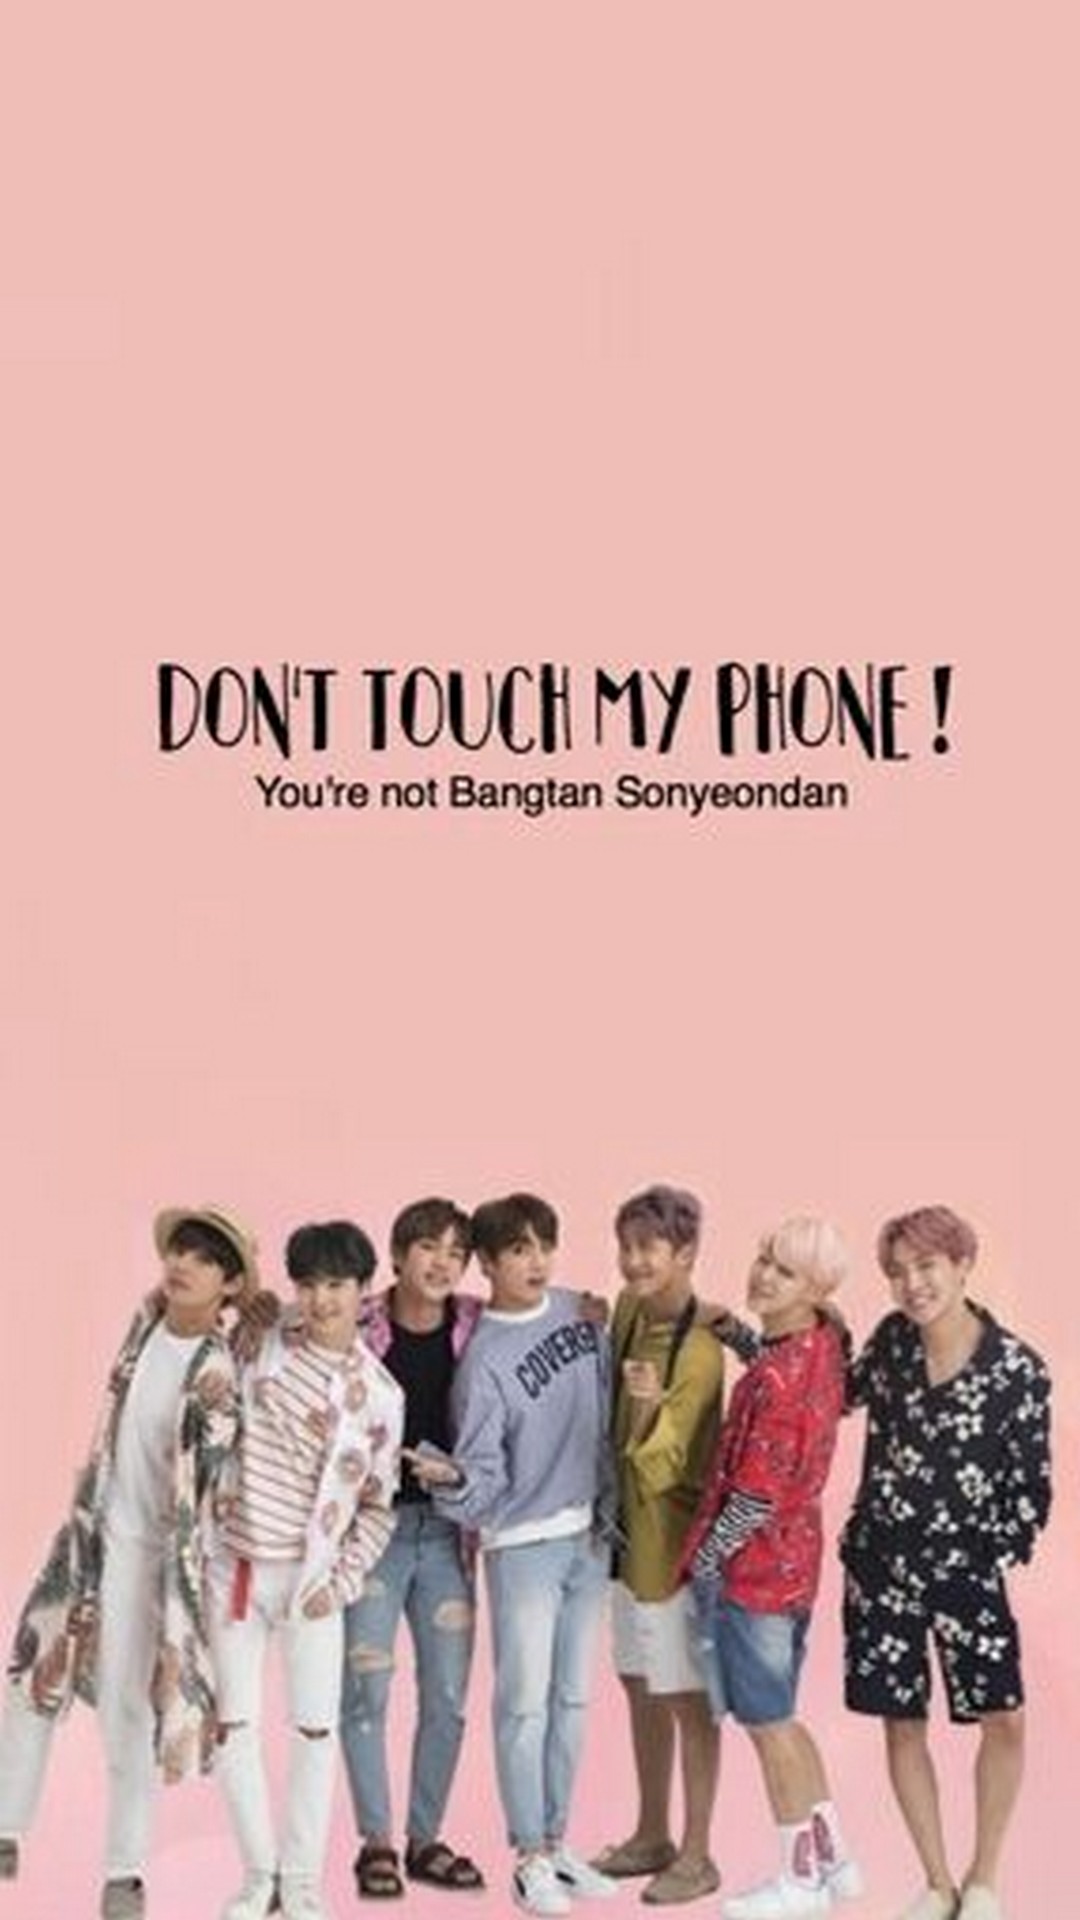 BTS Phone 8 Wallpaper With high-resolution 1080X1920 pixel. Download all Mobile Wallpapers and Use them as wallpapers for your iPhone, Tablet, iPad, Android and other mobile devices